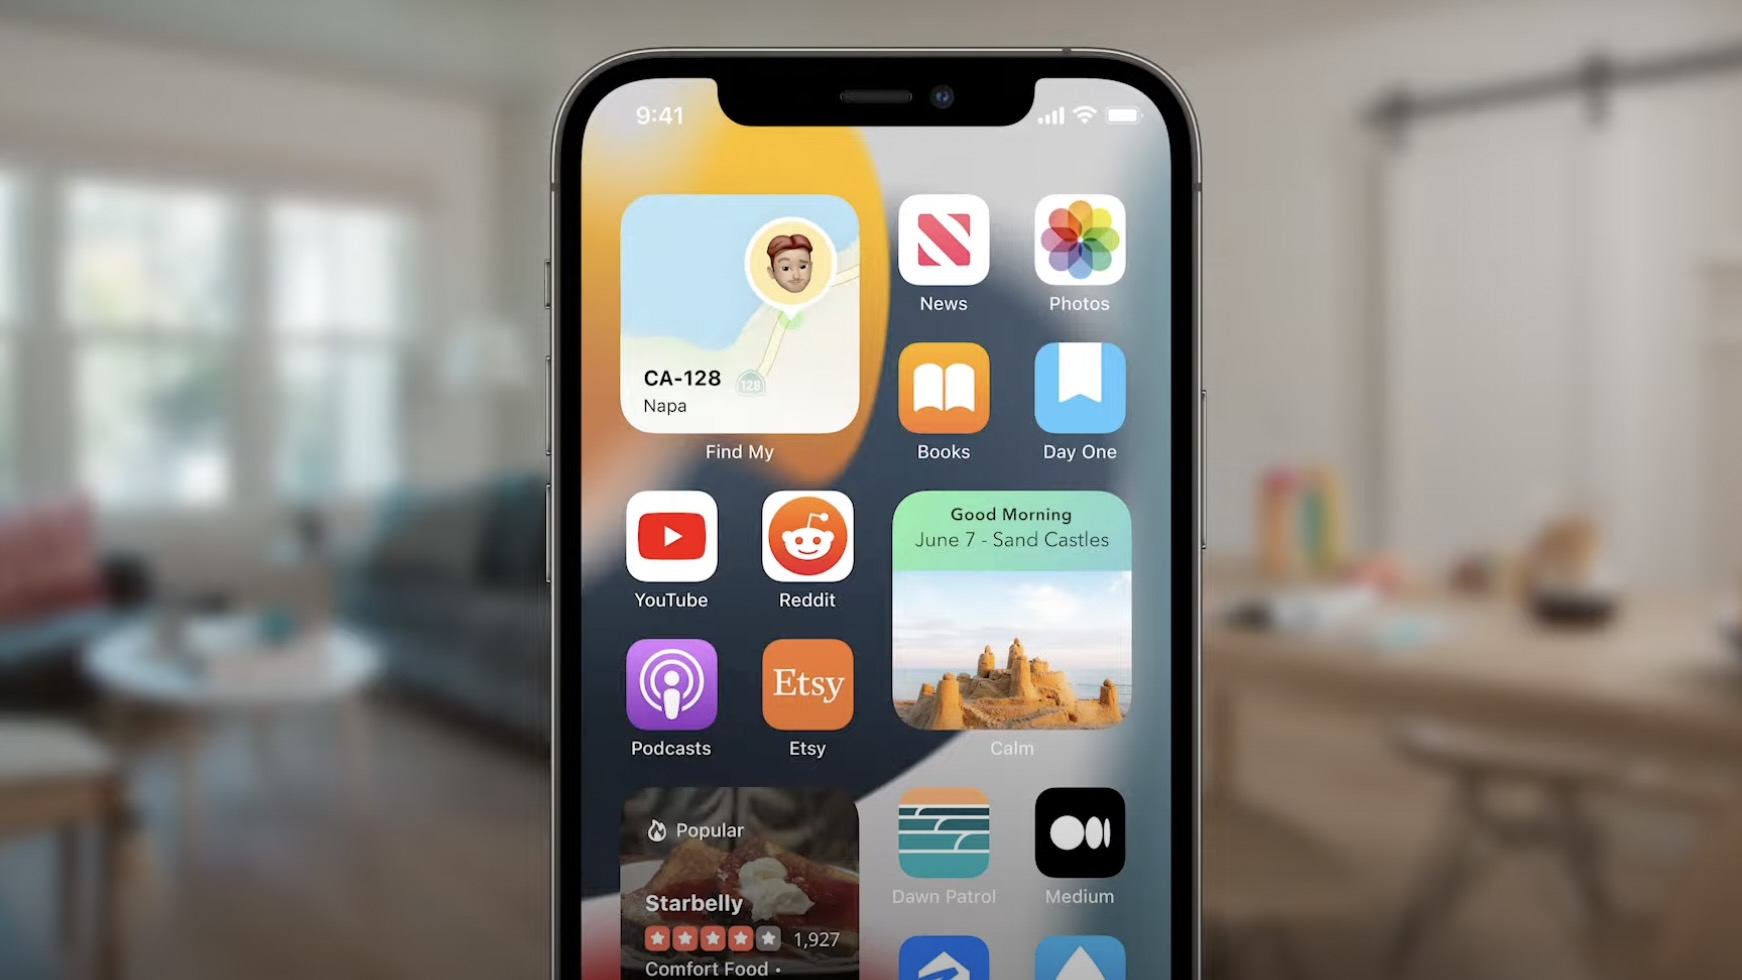 Ios 15 Includes New Home Screen Widgets For Find My Contacts Sleep And More 9to5mac